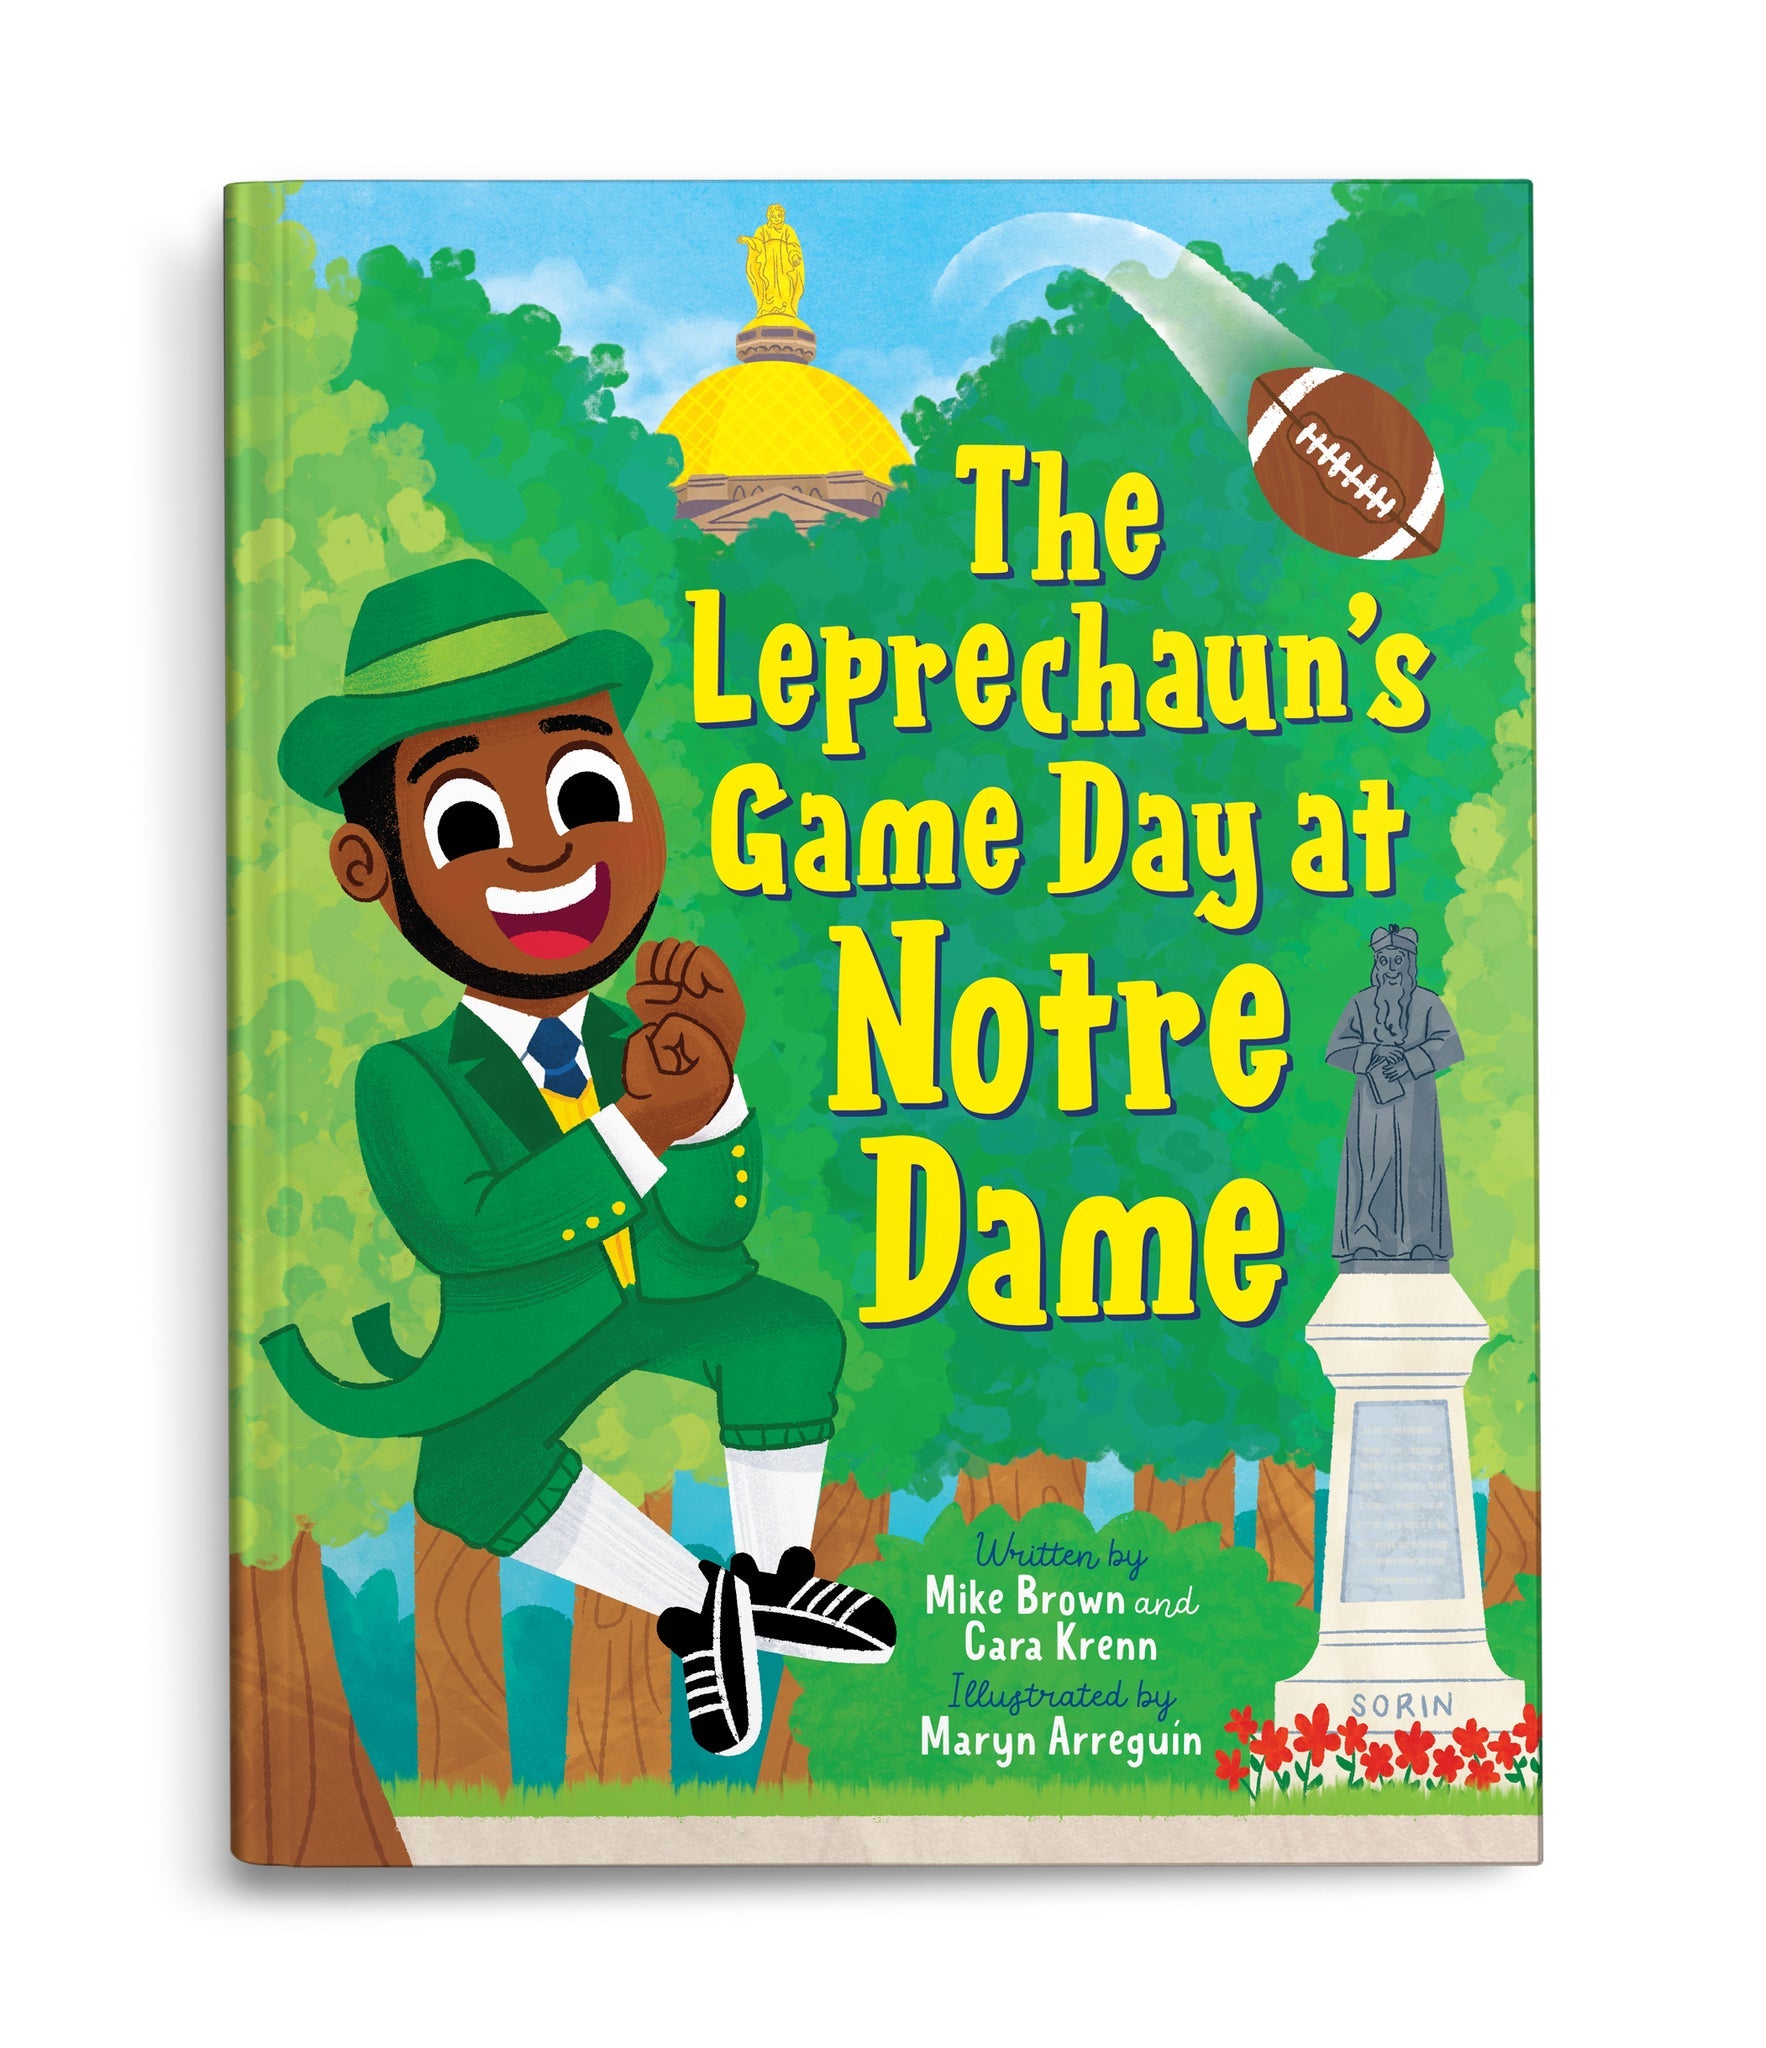 The Leprechaun's Game Day at Notre Dame